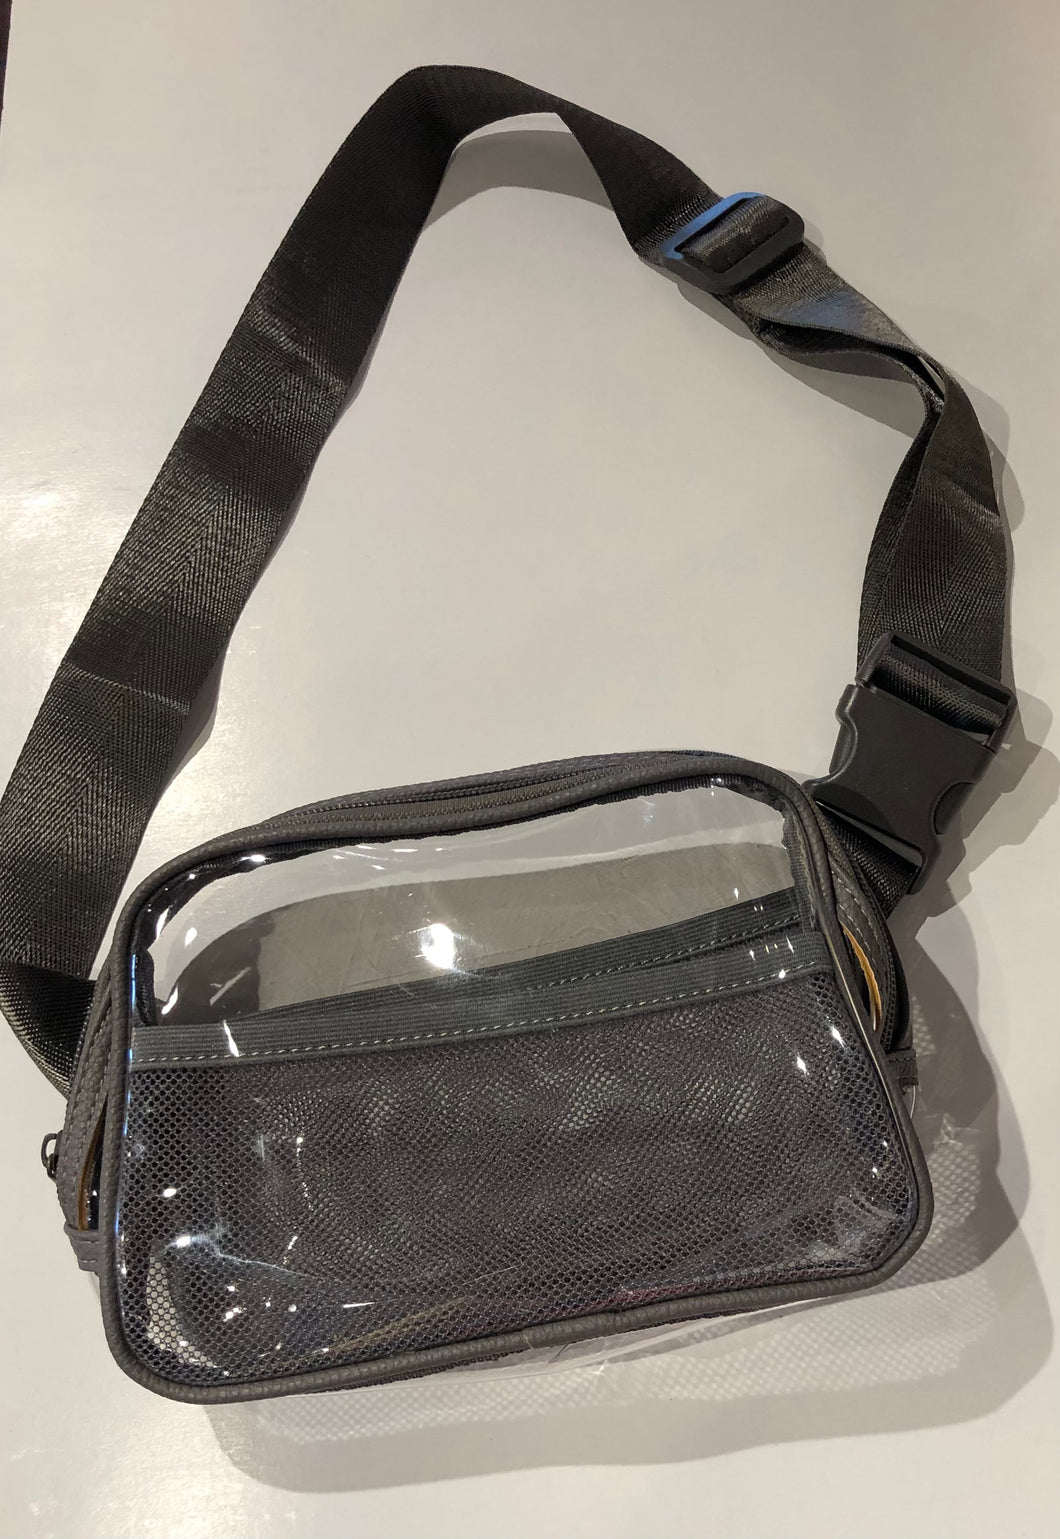 Stadium Clear bag with Gold Trim and Guitar Strap